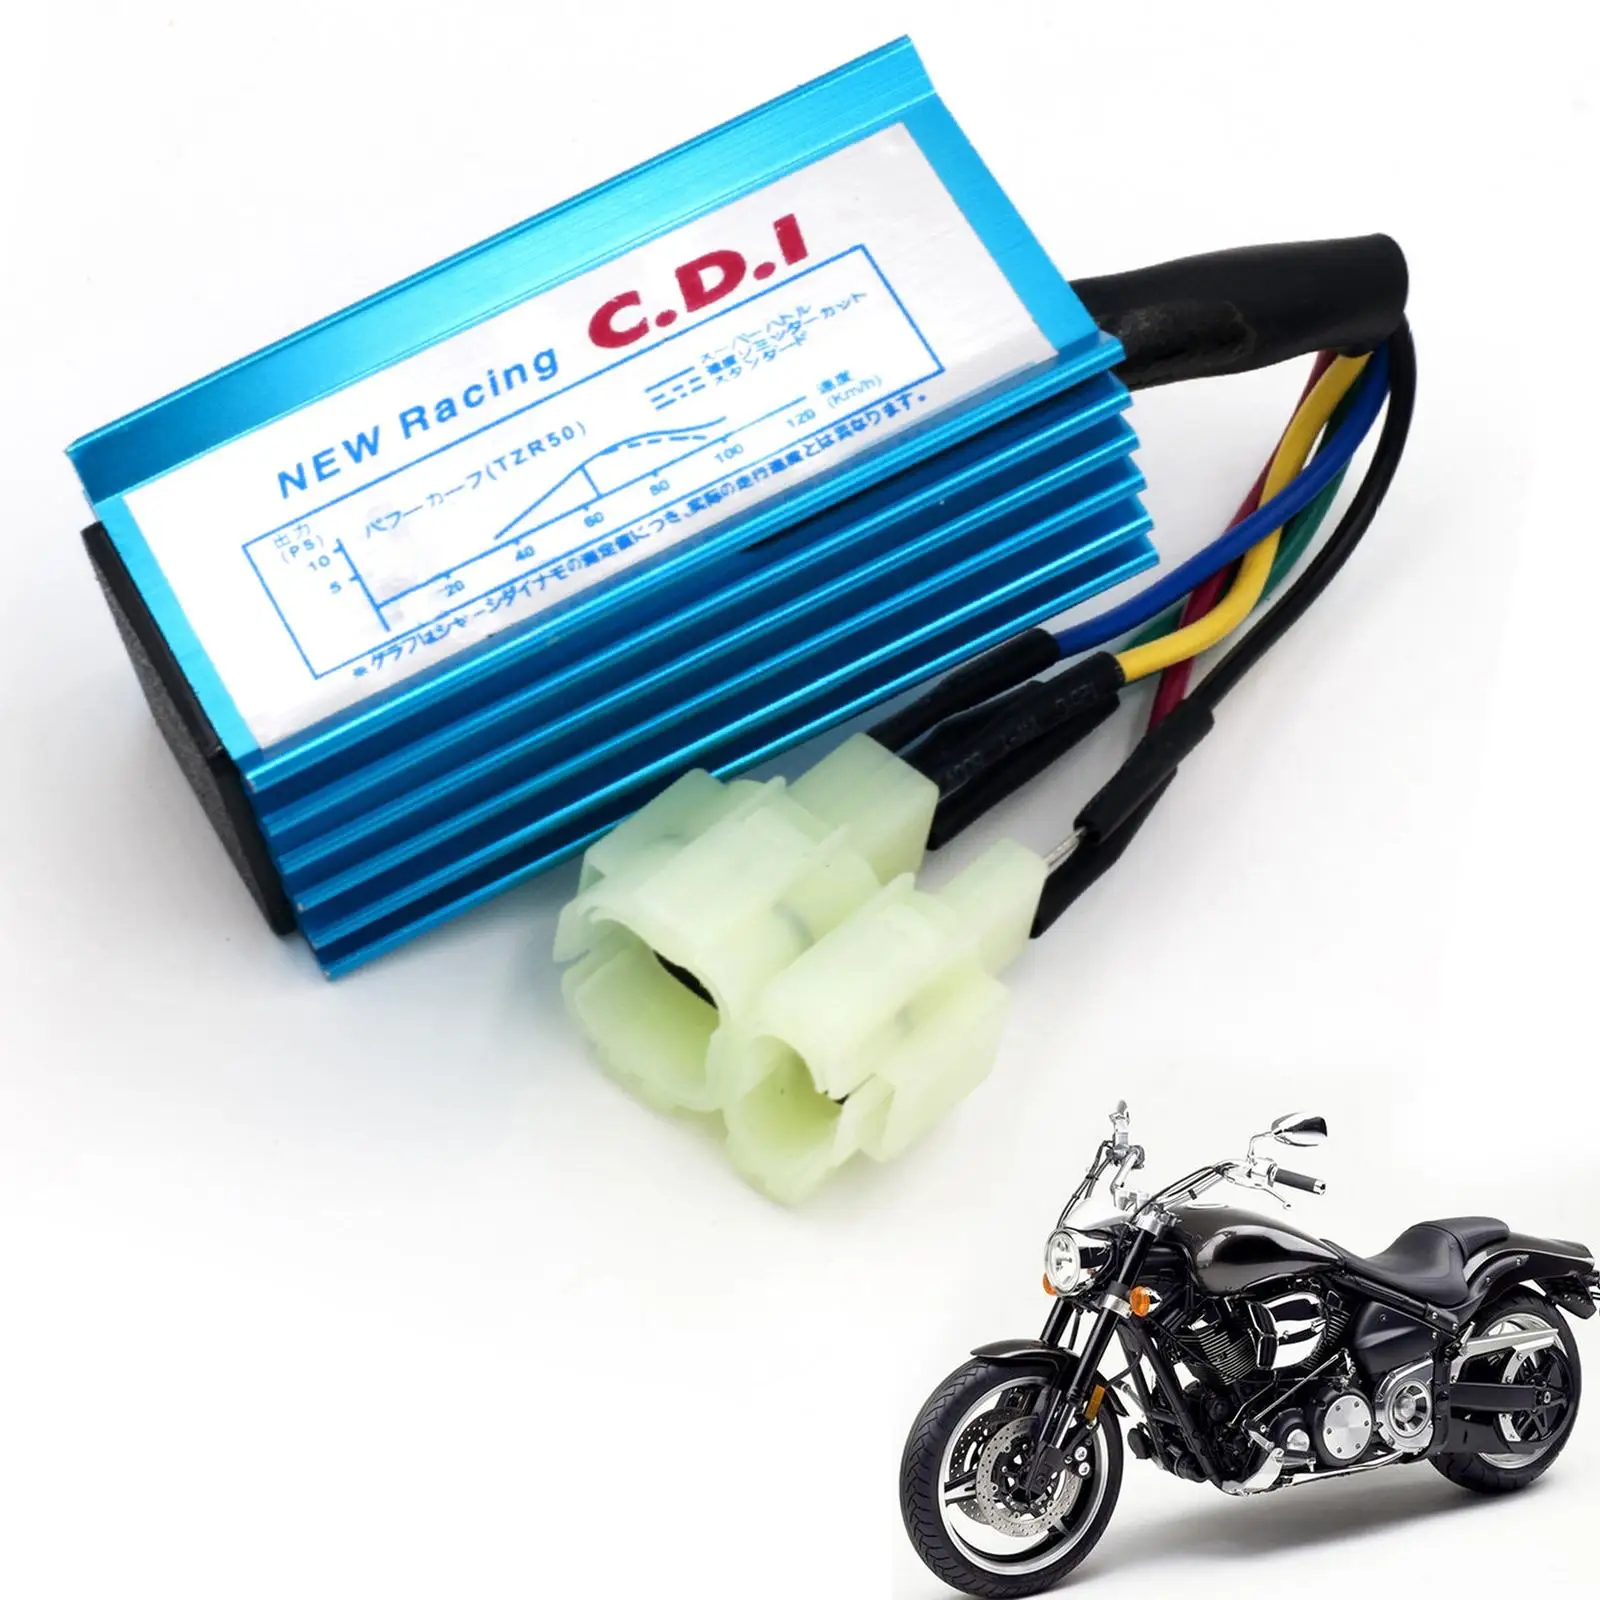 Gy6 Racing Cdi Box Blue Aluminum Fits for Gy6 50cc-250cc Motorbikes Mopeds